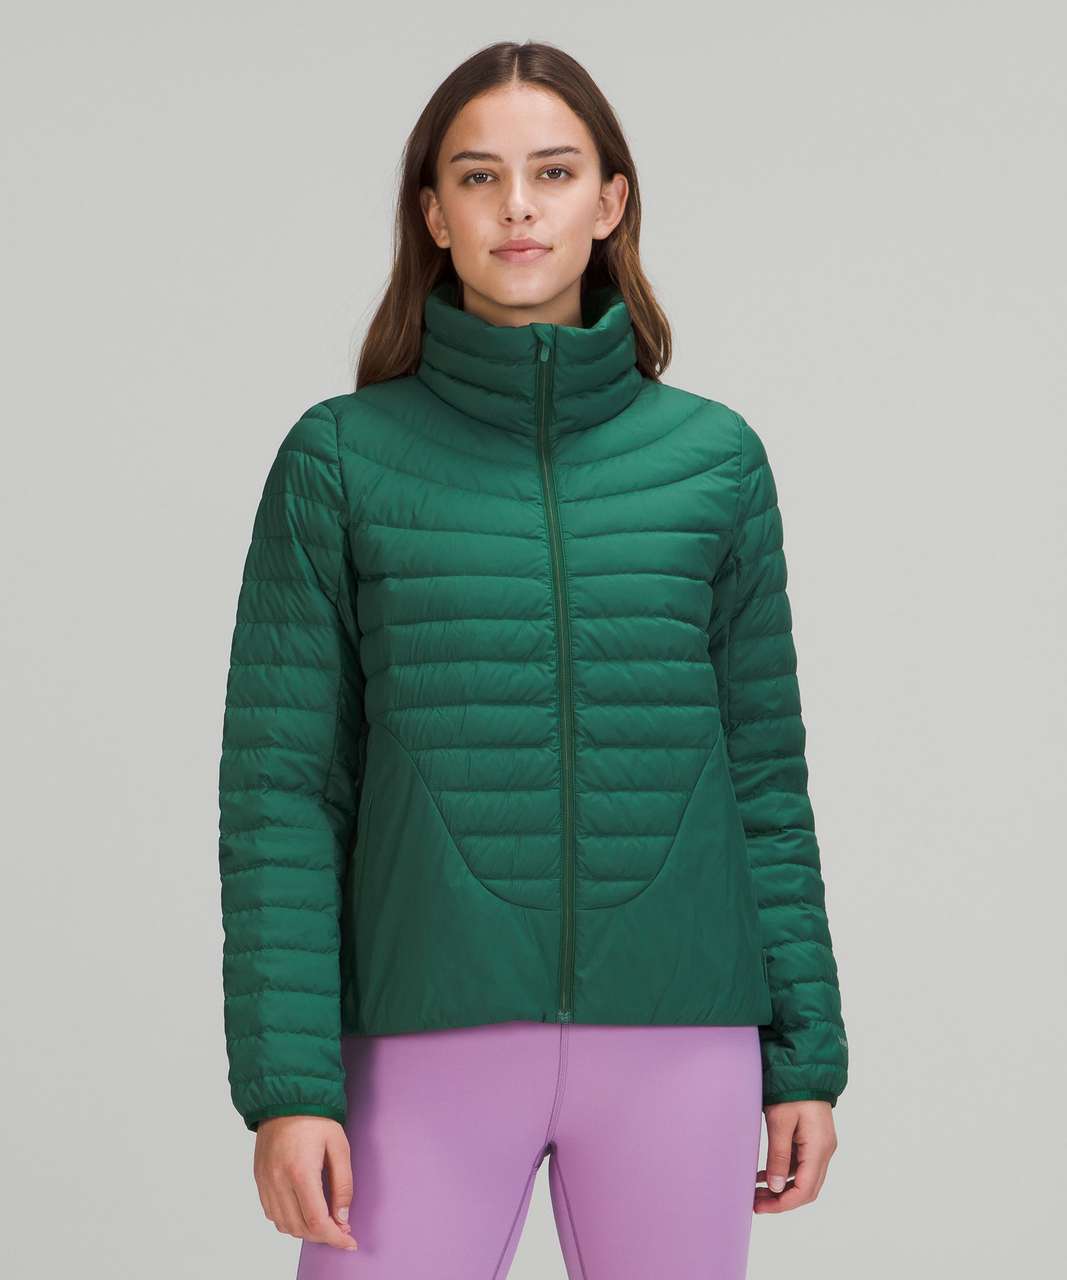 NWT Lululemon Down For It All Down Jacket 700 Fill Sz 6 ❤️ Everglade Green